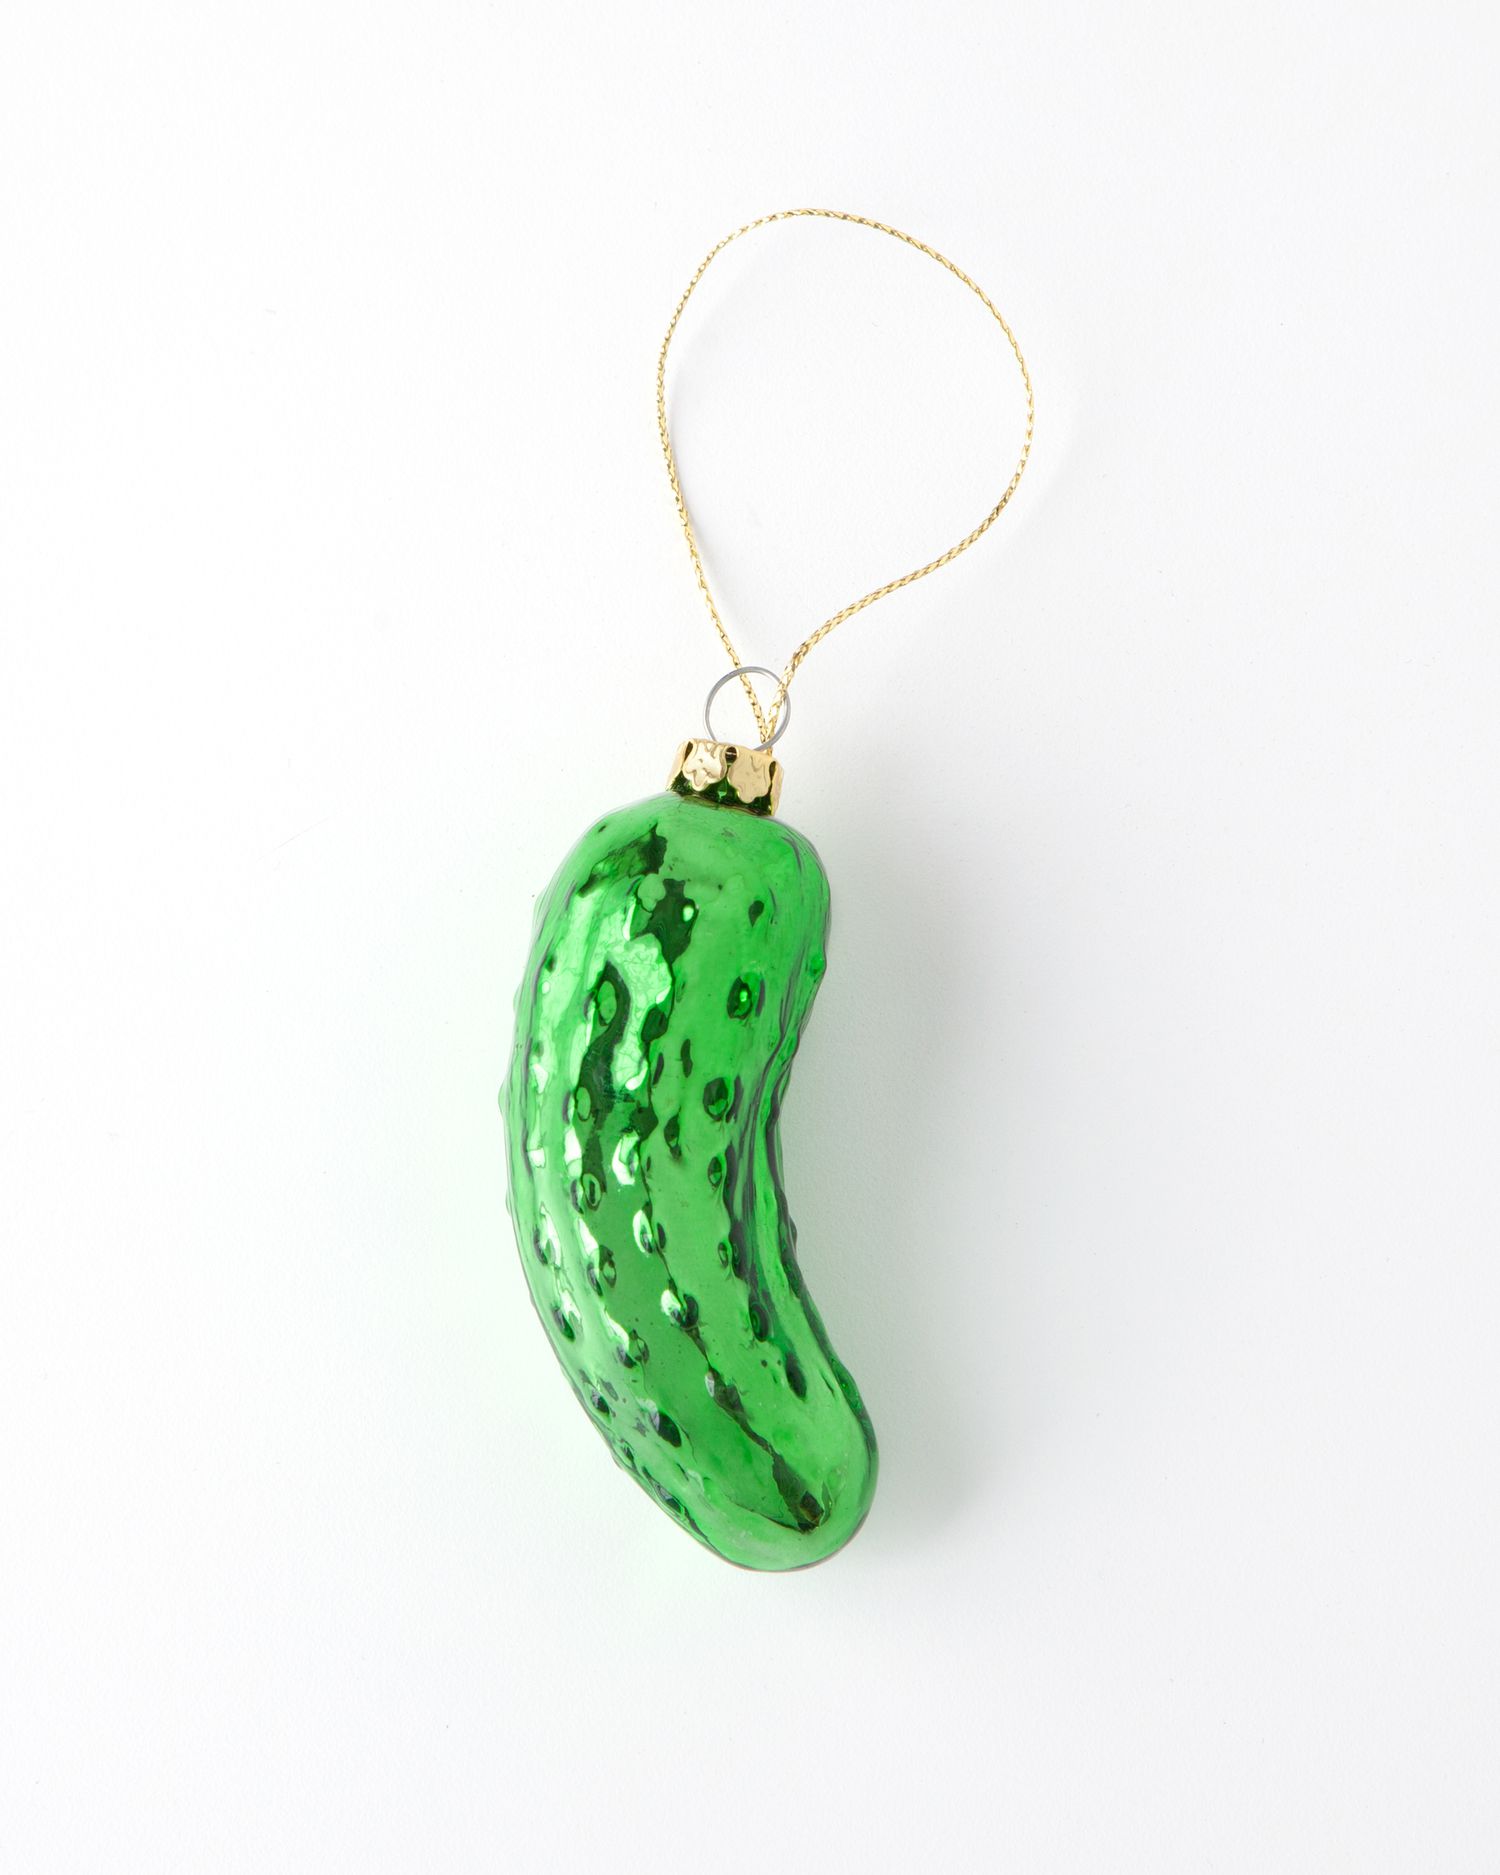 LEGEND OF THE PICKLE CHRISTMAS TREE ORNAMENT GERMAN OLD WORLD HOLIDAY TRADITION 